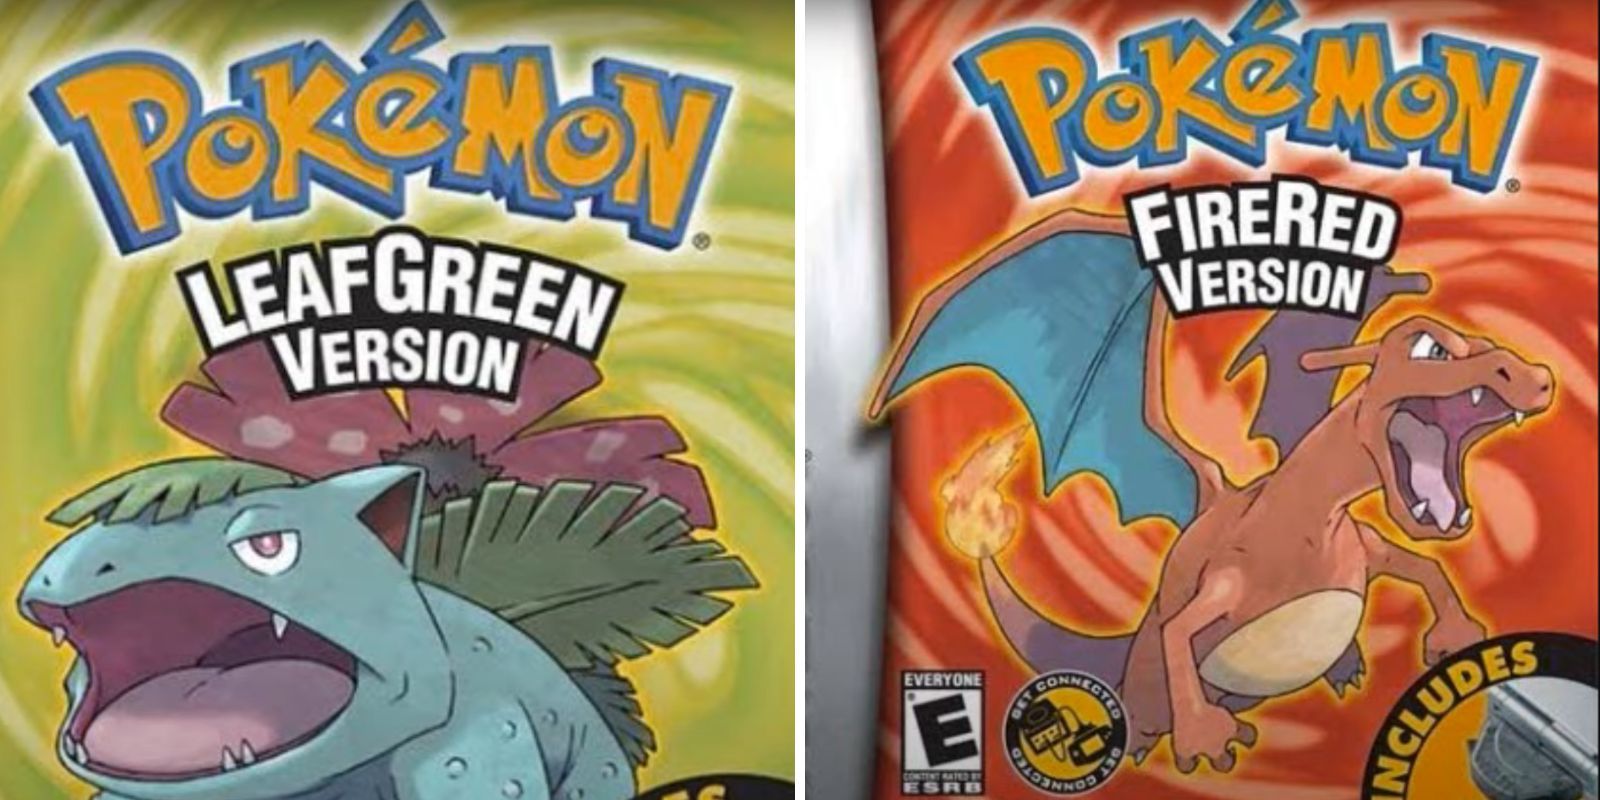 The Pokemon character is showing the front of the Pokemon LeafGreen and FireRed versions.